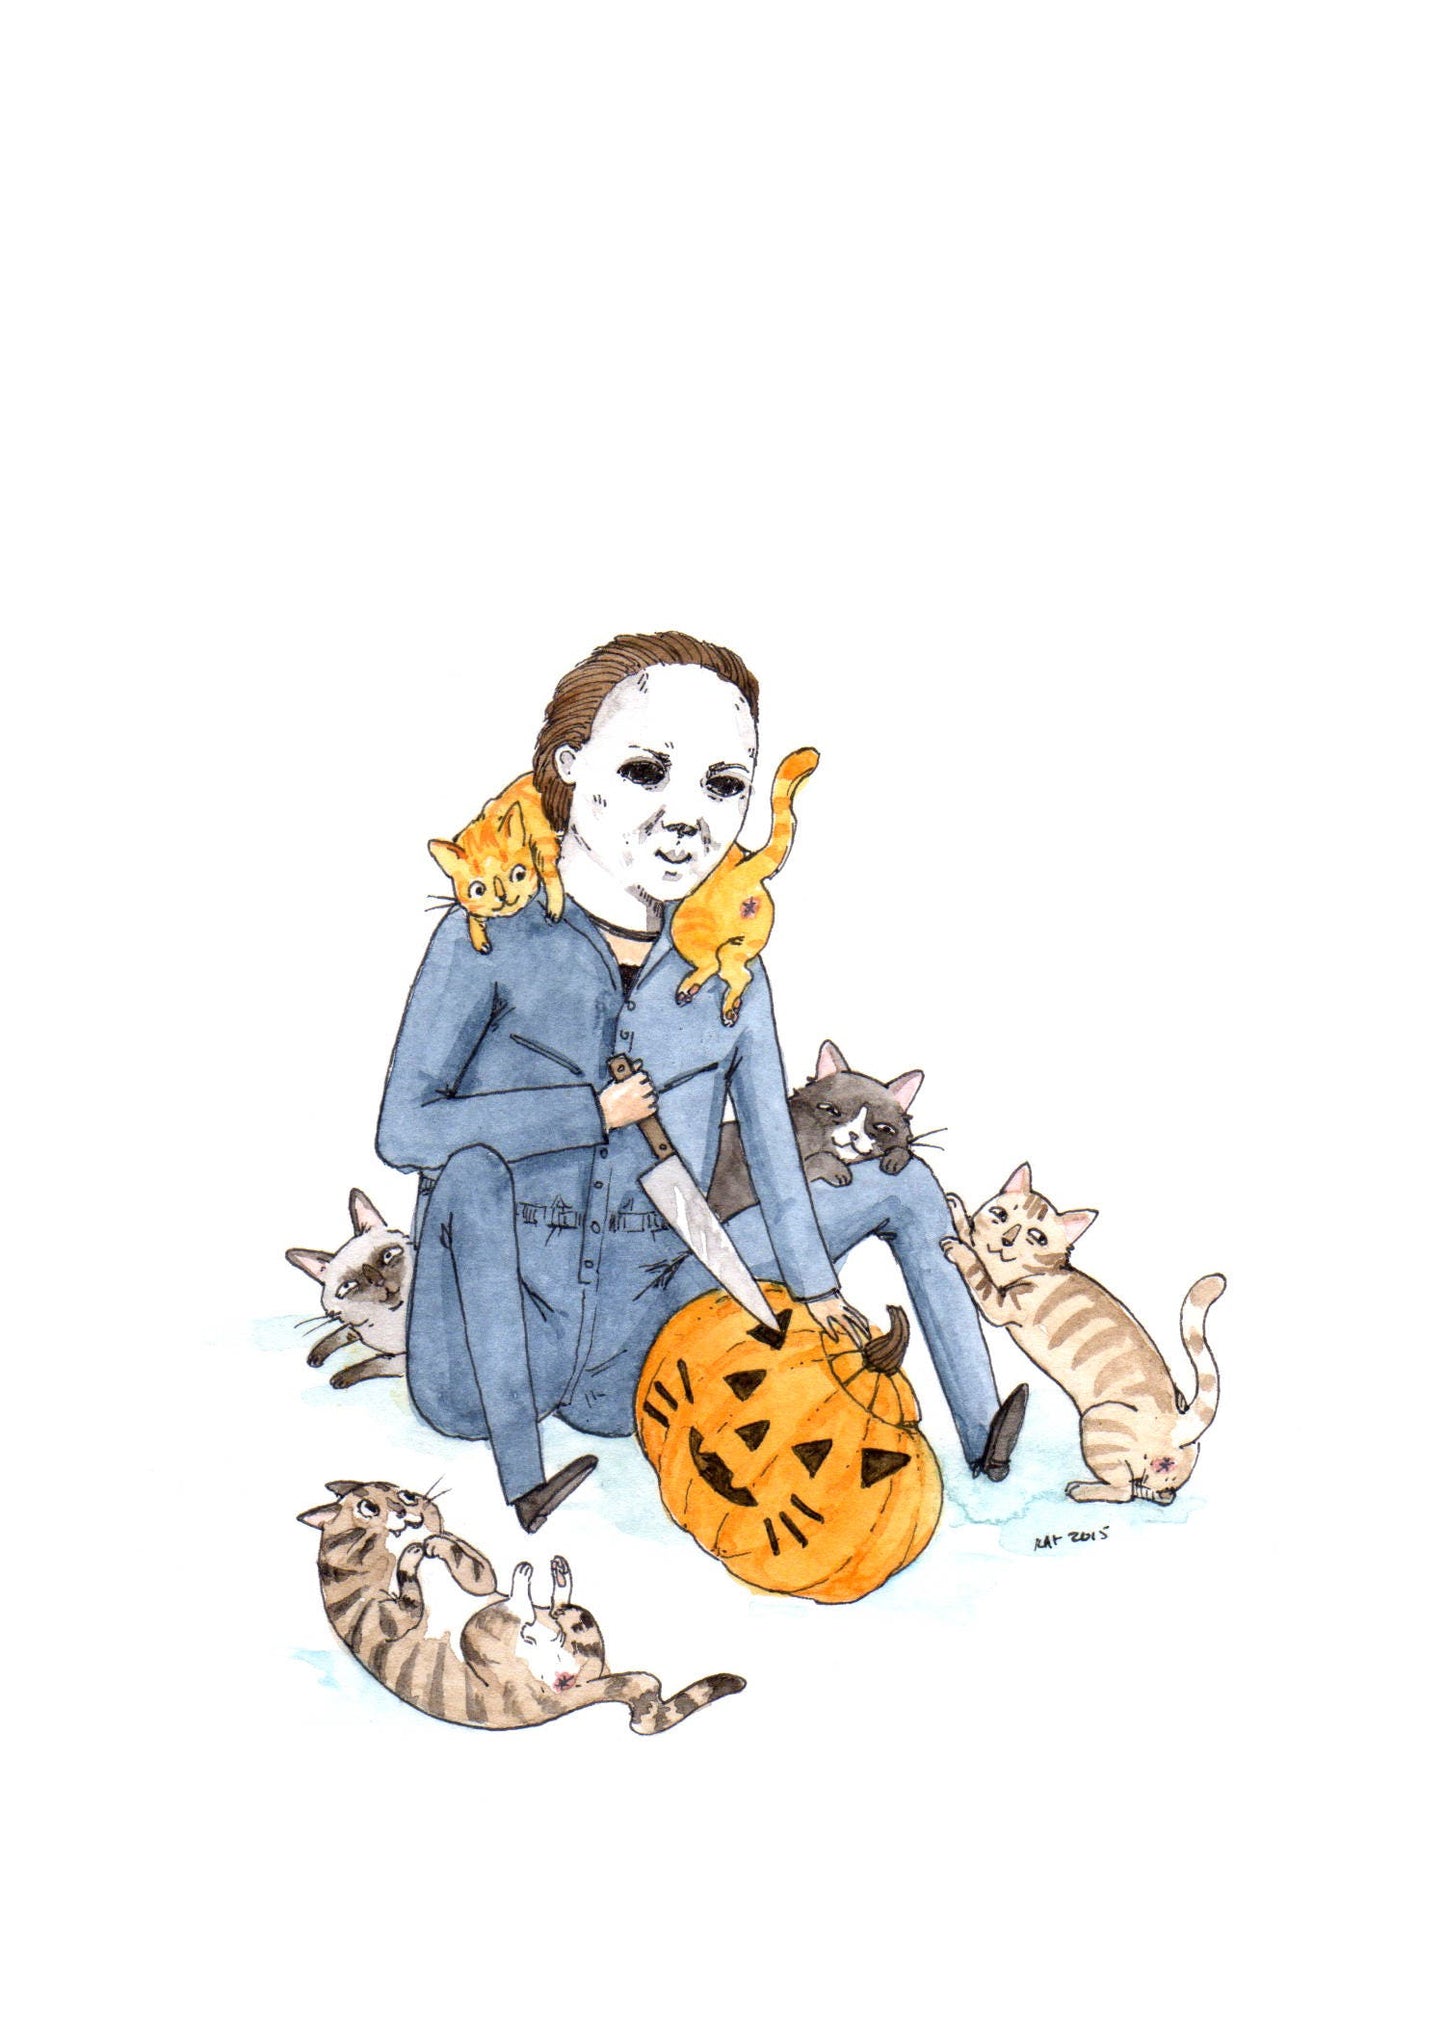 Meowlloween - Halloween with Cats Print- Available in 5x7", 8x10", & 11x14"